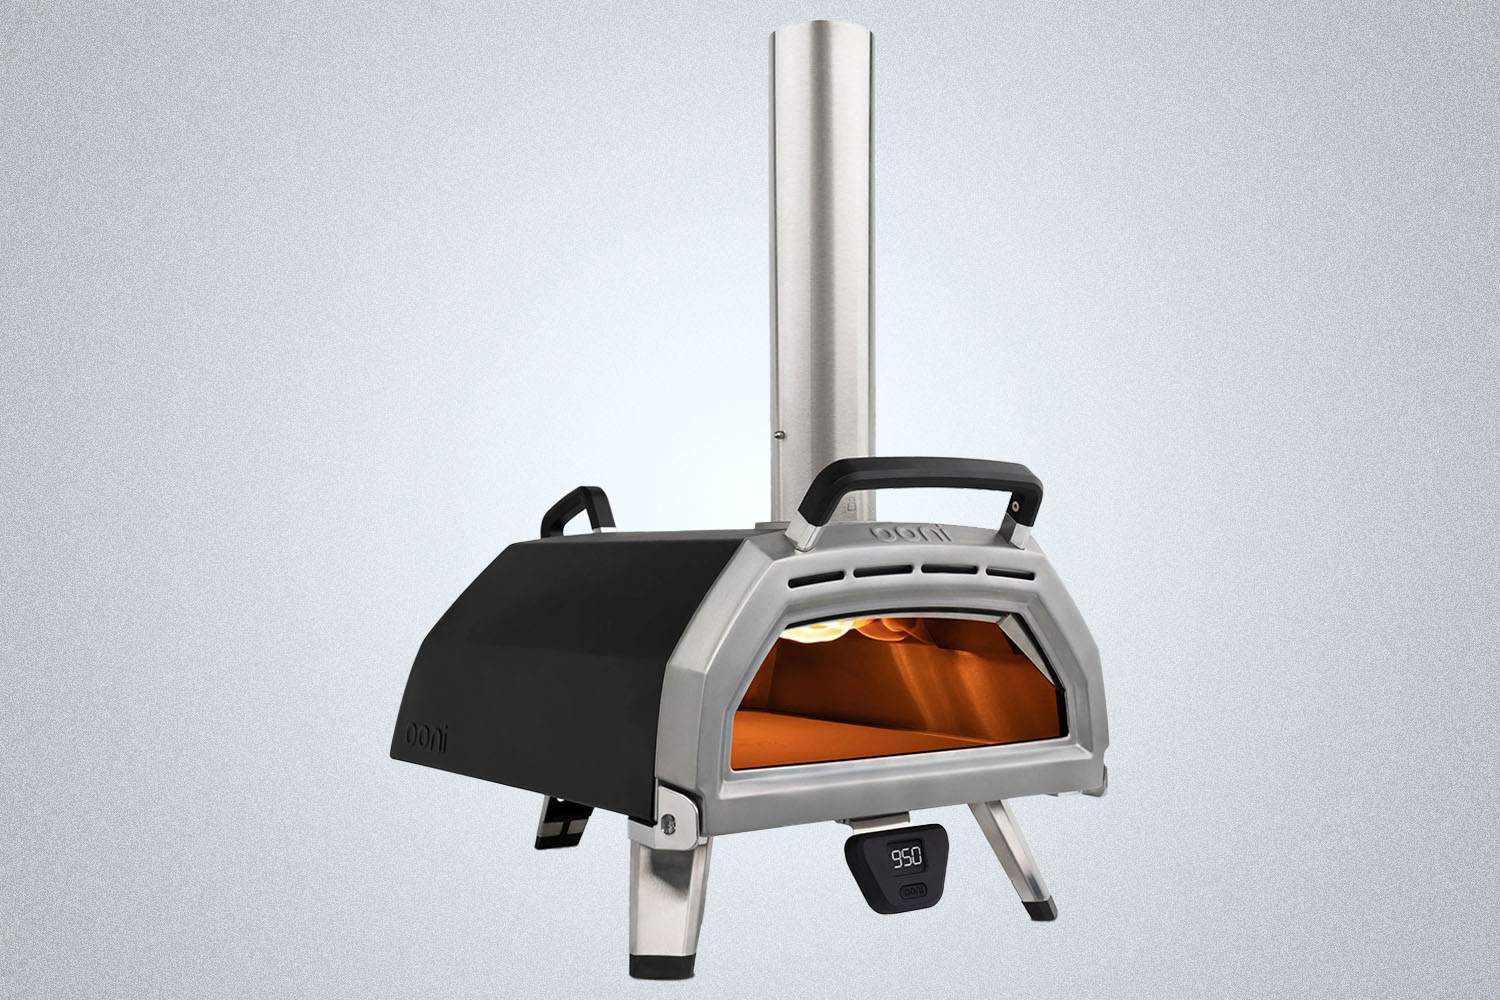 An Ooni pizza oven on a grey background